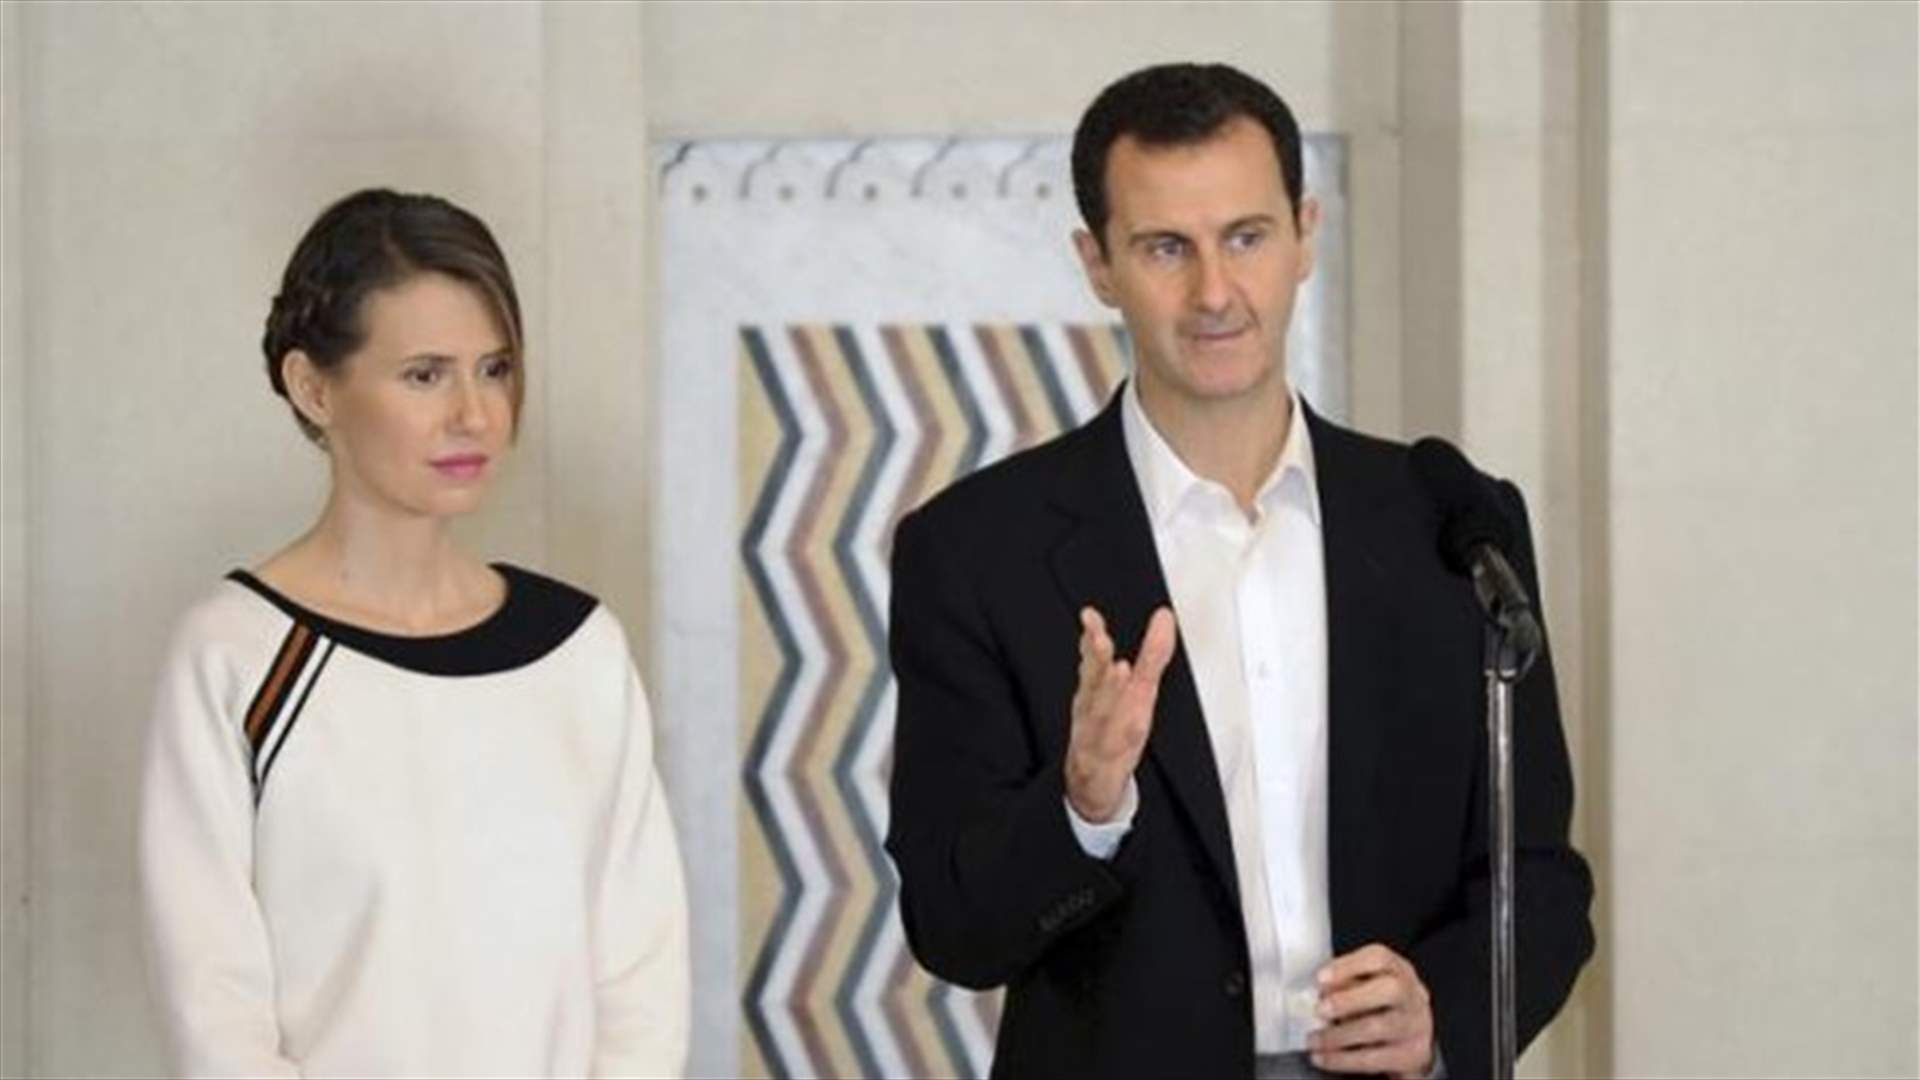 Syrian government rules out talks on Assad future, focus is counter-terrorism